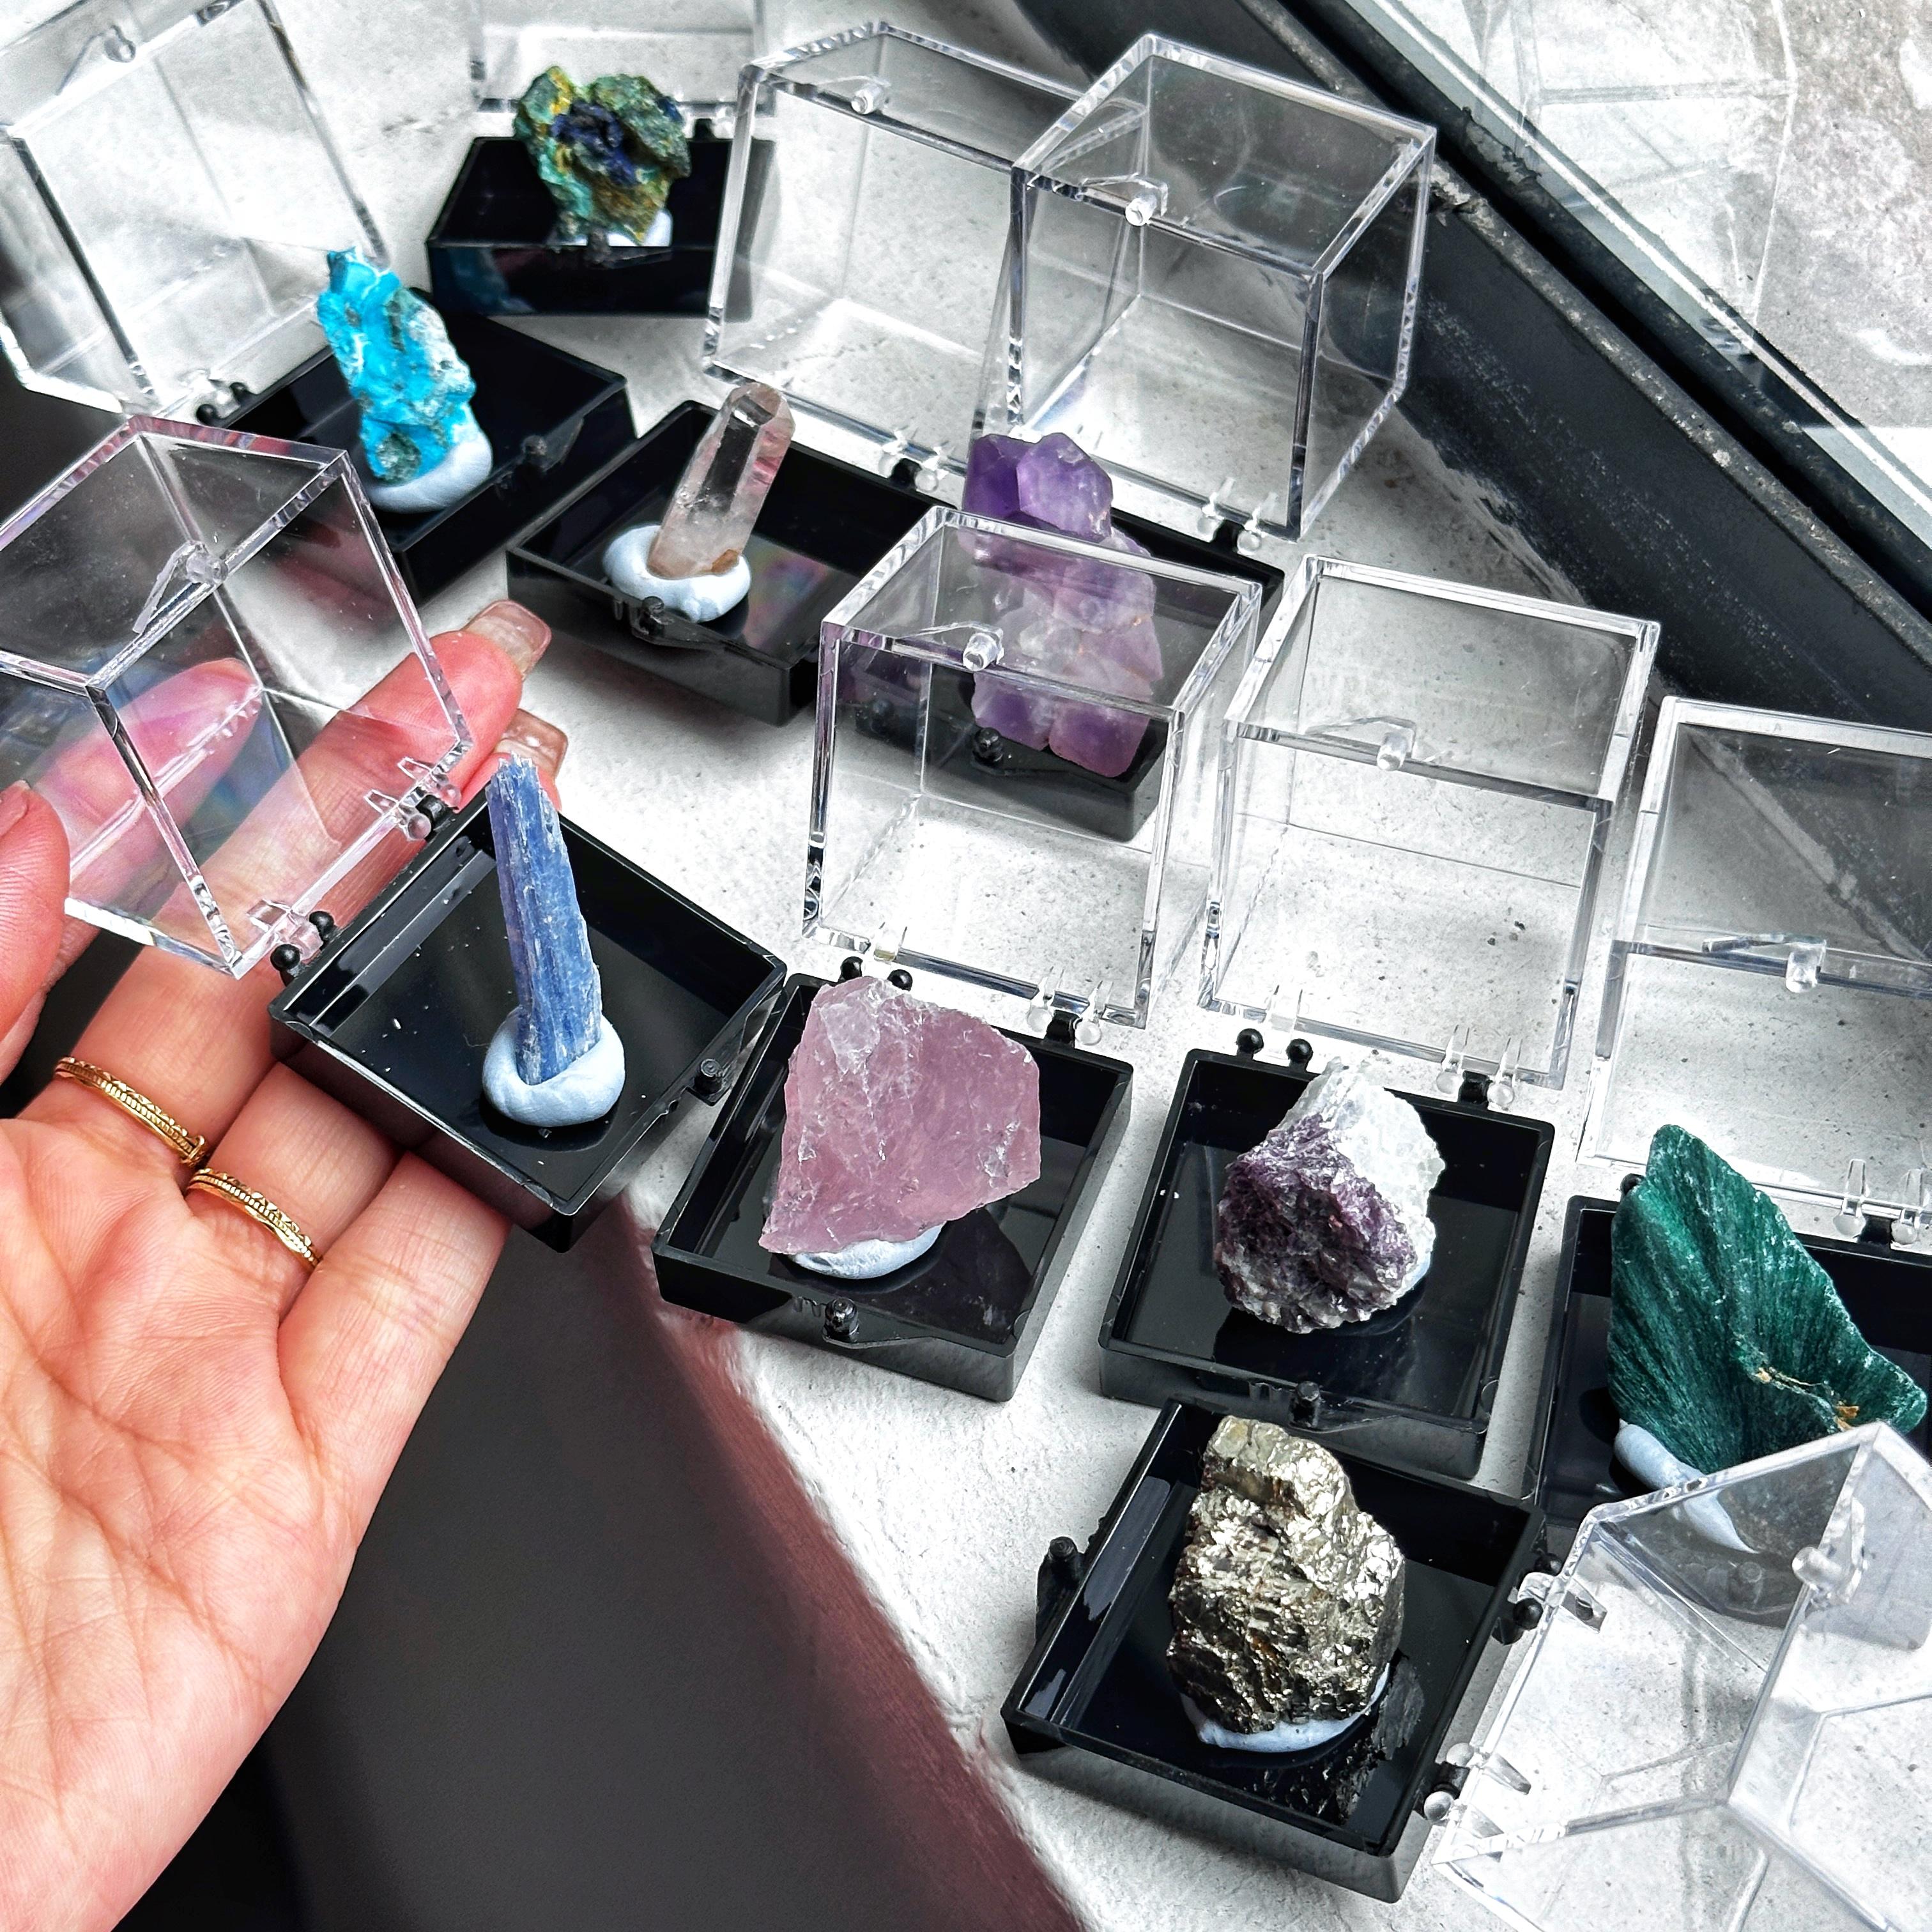 Crystal Specimen Gift Box - For Crystal Collectors